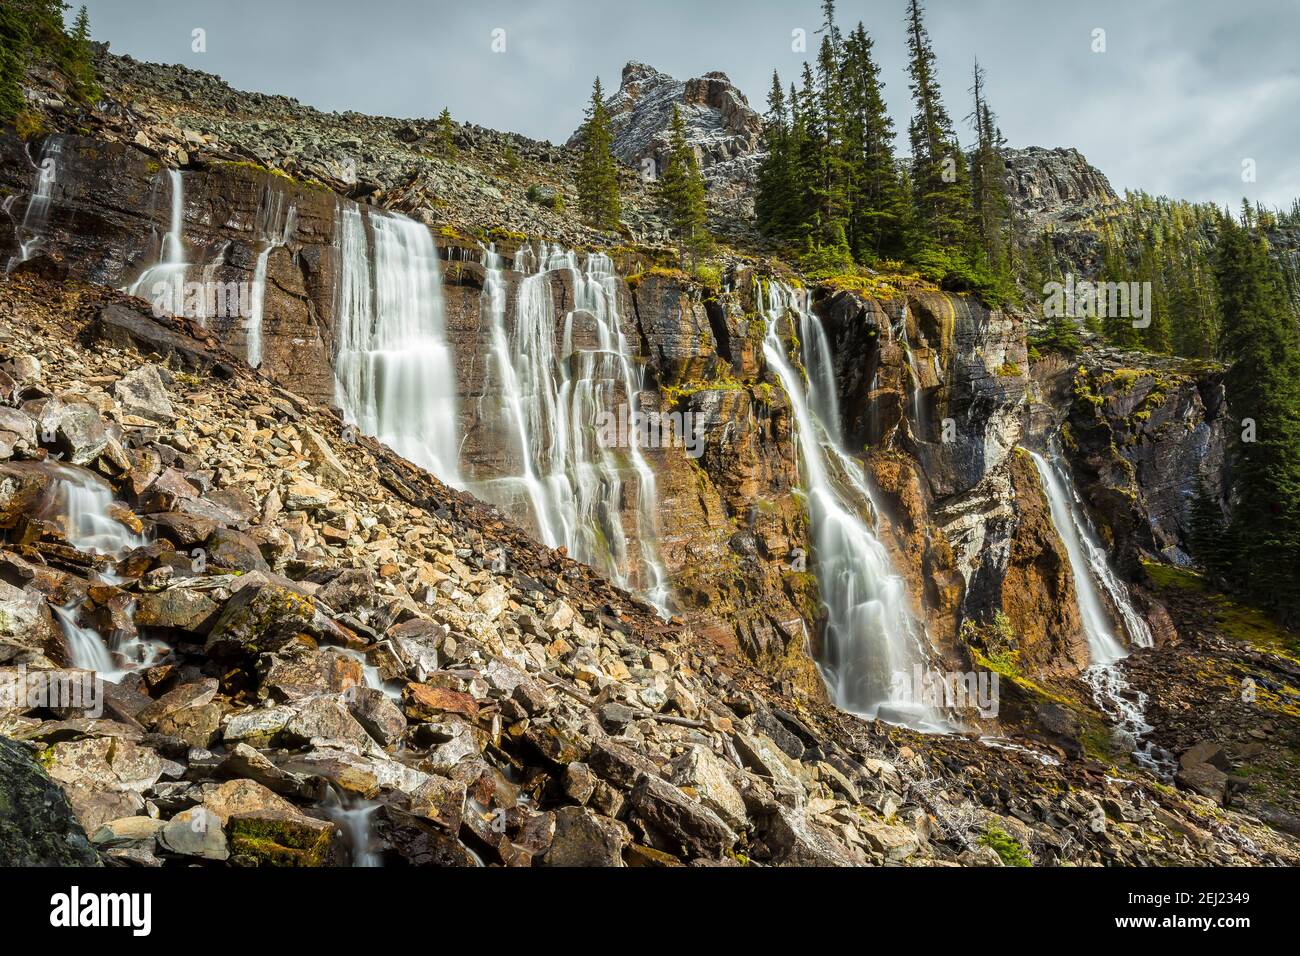 Long exposure of seven waterfalls during autumn, surrounded by rocky mountains and tress, Lake O'Hara, Yoho National Park, British Columbia, Canada Stock Photo